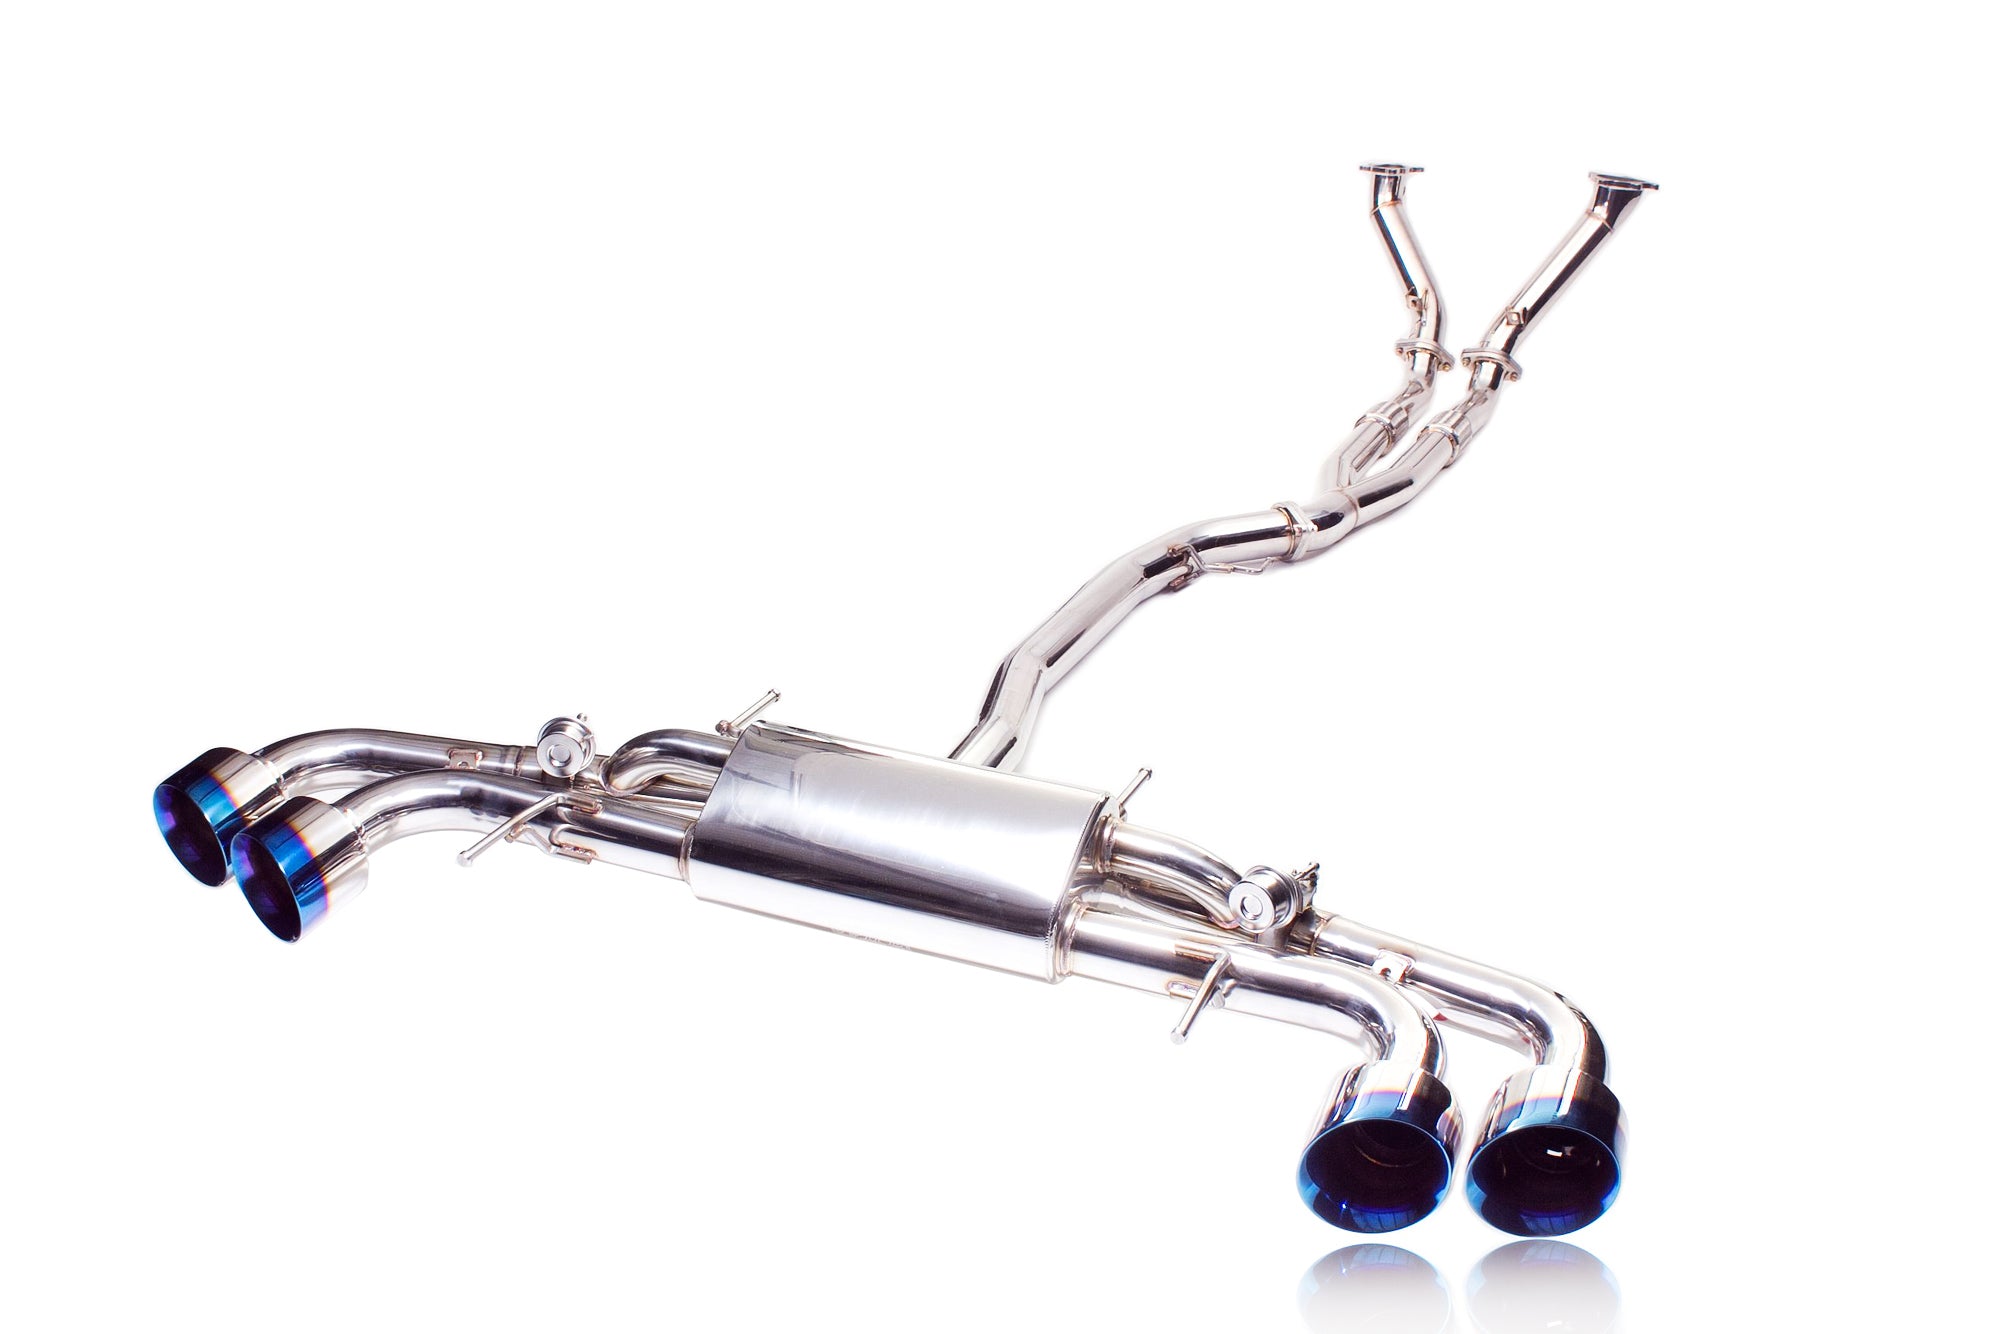 iPE - Valvetronic Exhaust w/ OBD Remote & Gold Tips suit Nissan GT-R (R35) (2007-Current) - MODE Auto Concepts